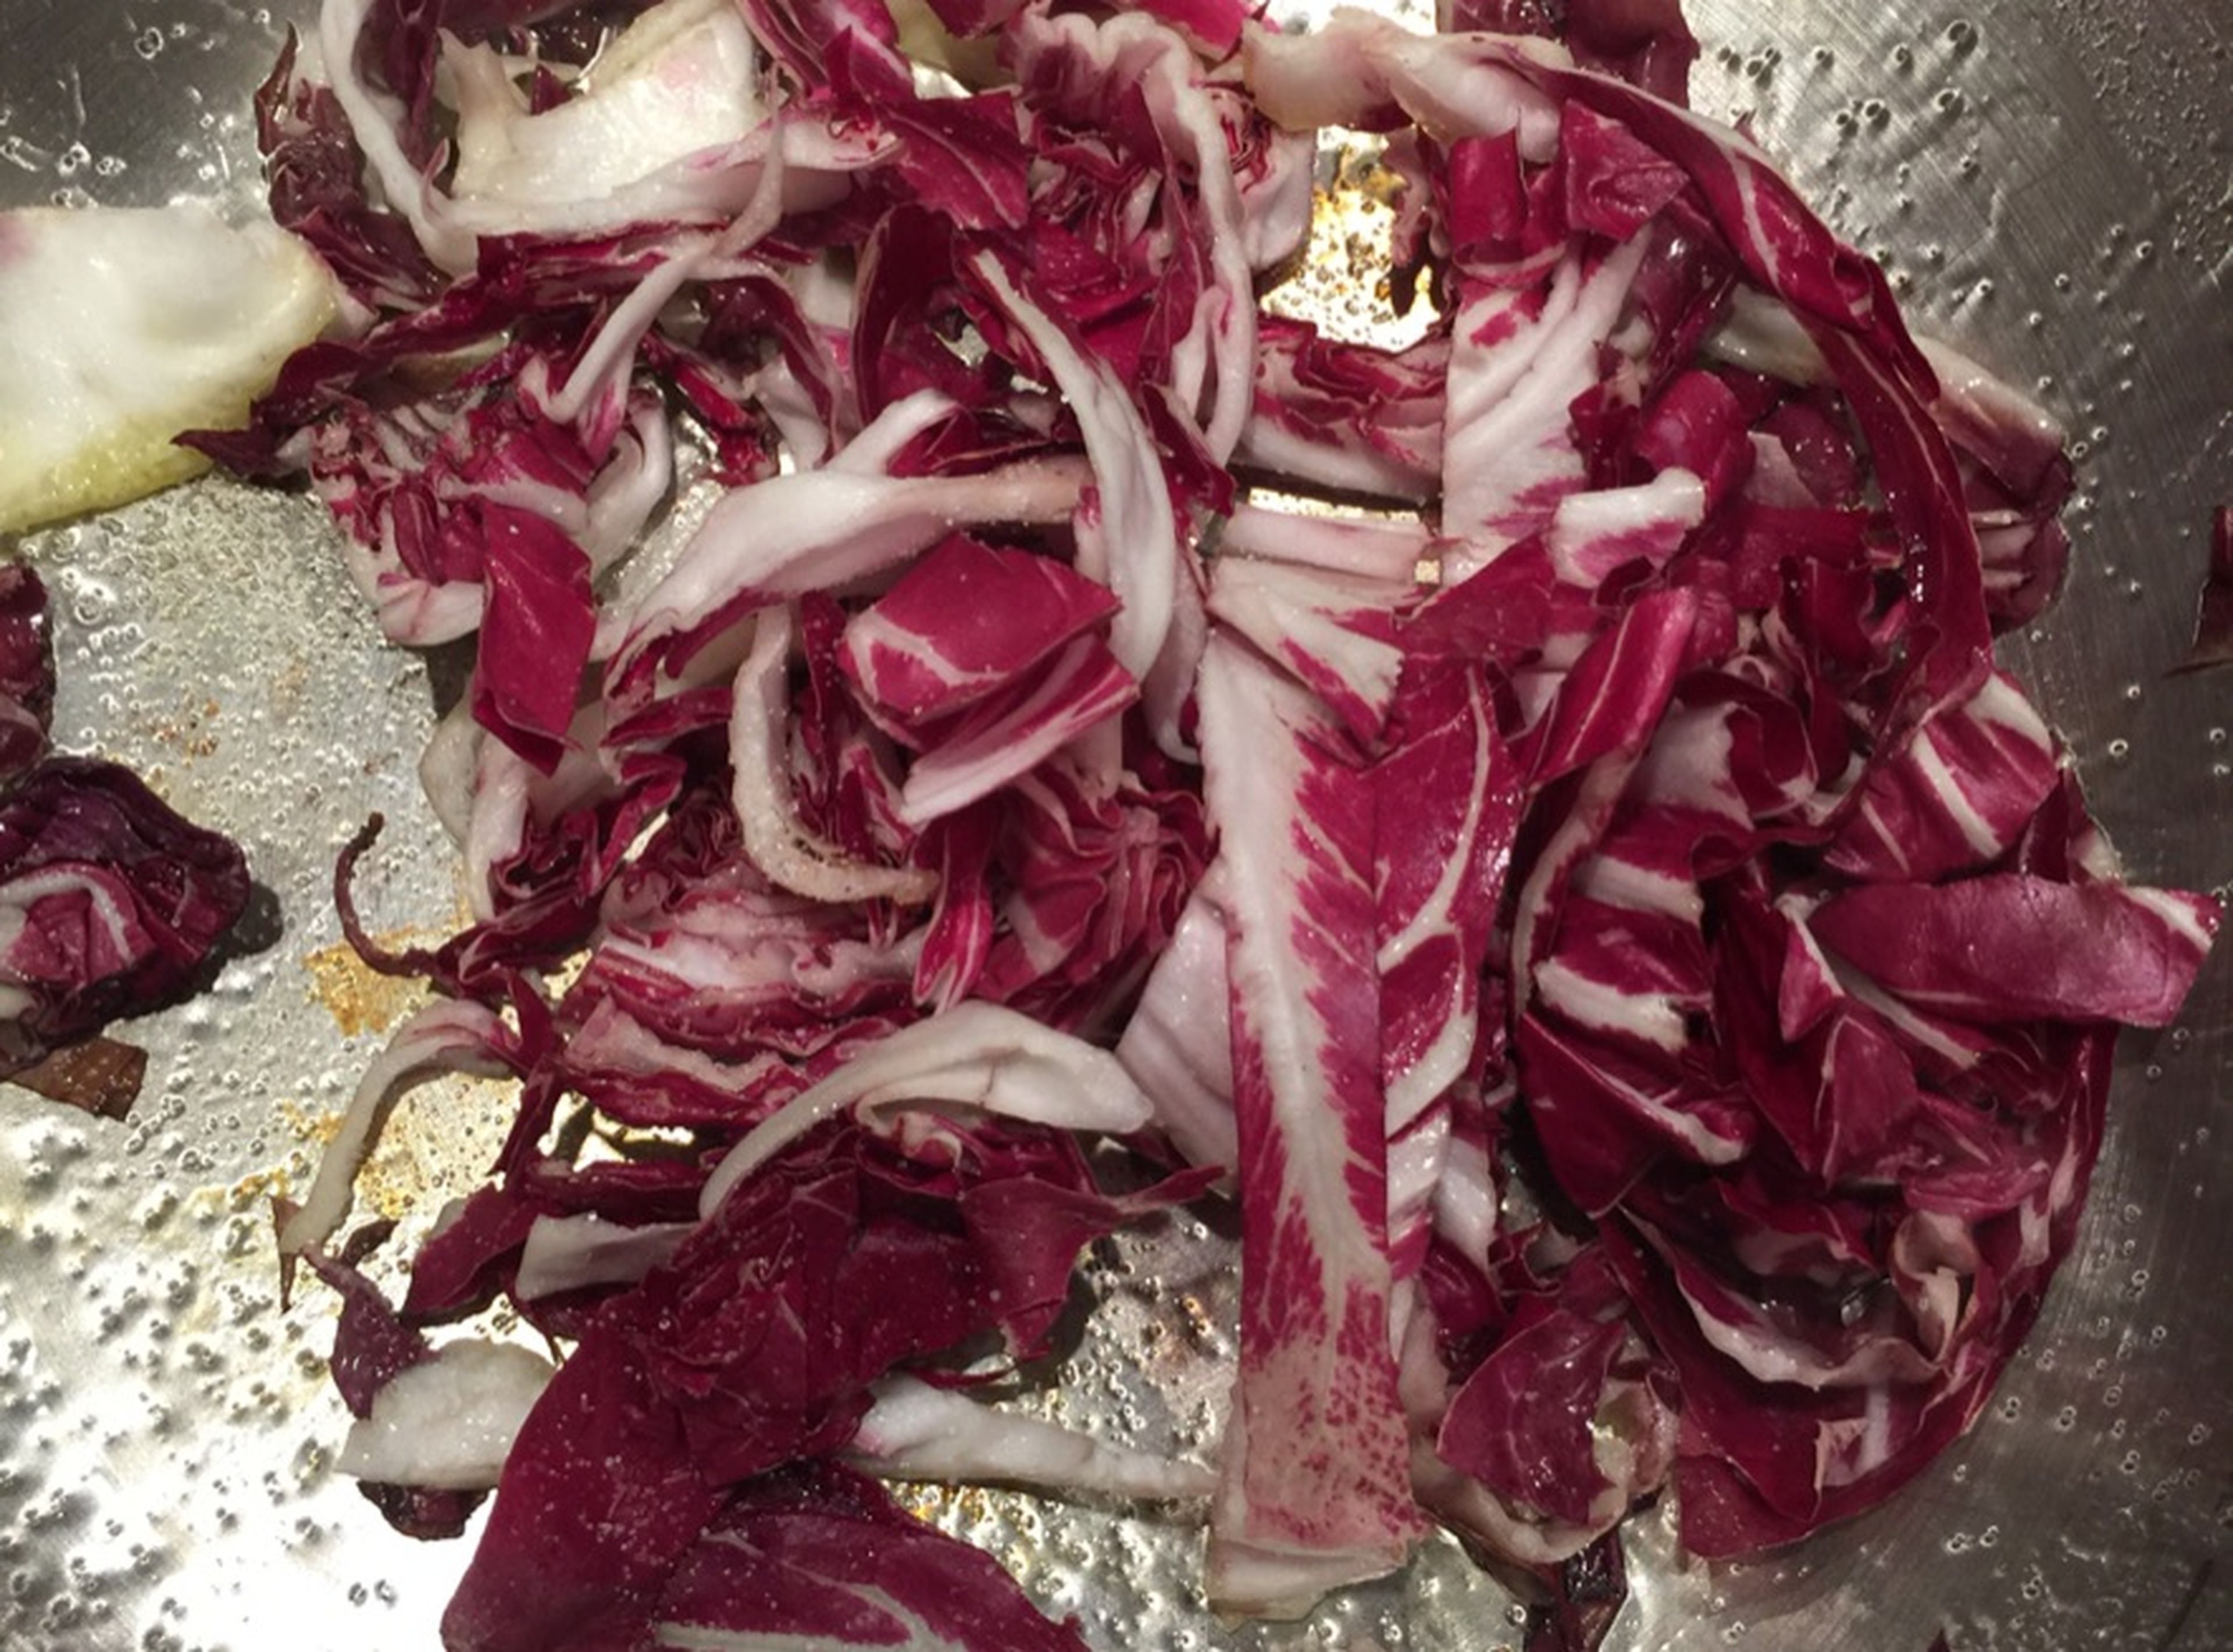 Roughly chop radicchio. Heat vegetable oil in a frying pan over medium heat and fry radicchio until golden brown. Season with salt to taste. Serve hot potato soup in bowls with fried radicchio and freshly chopped chives. Enjoy!